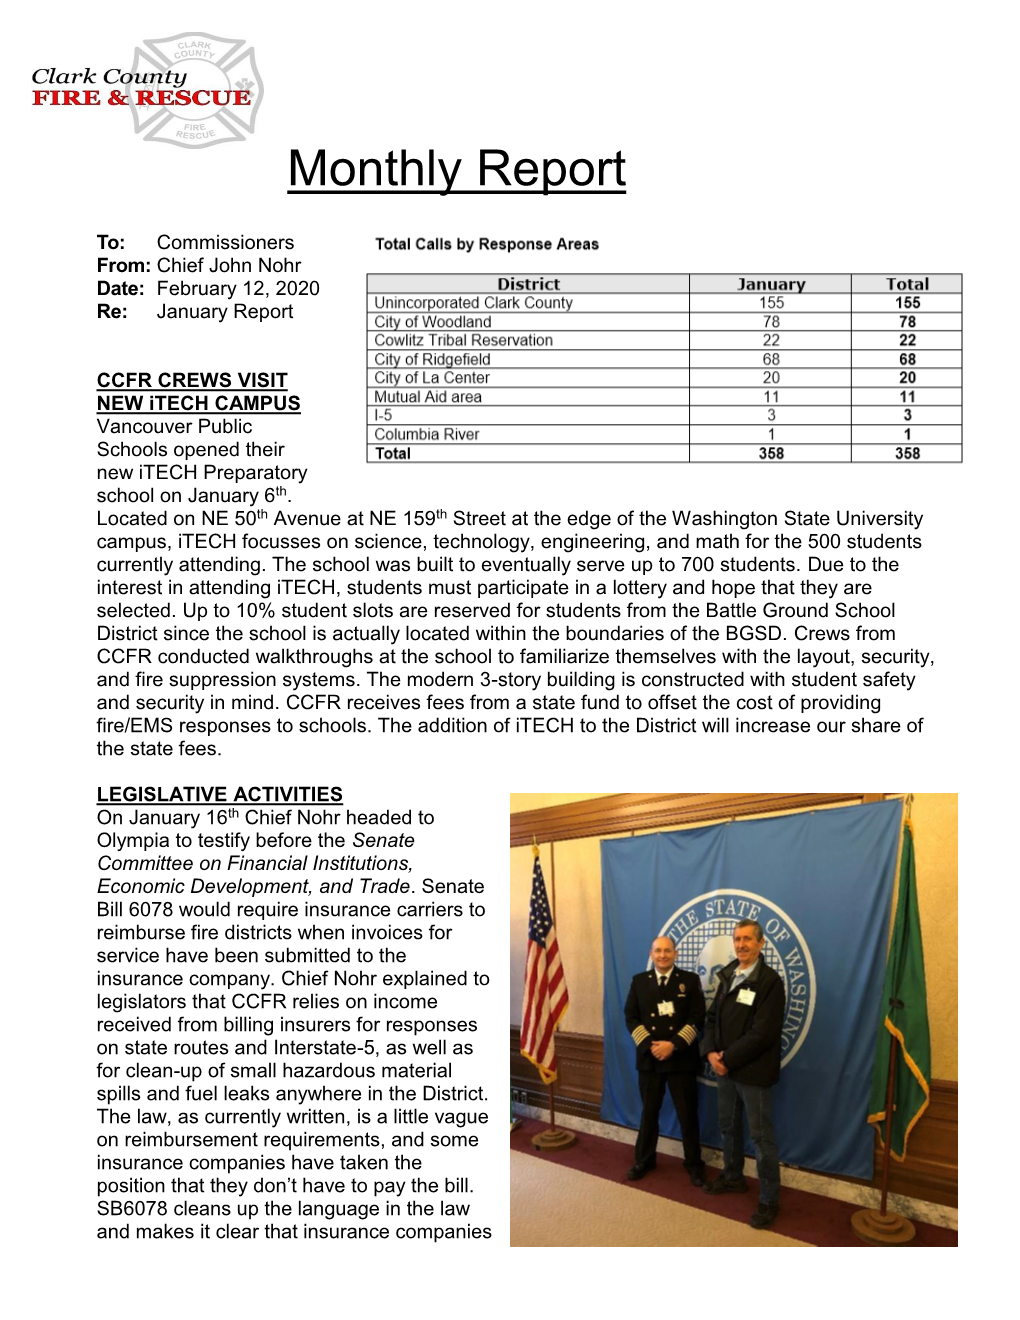 Chief's Report January 2020